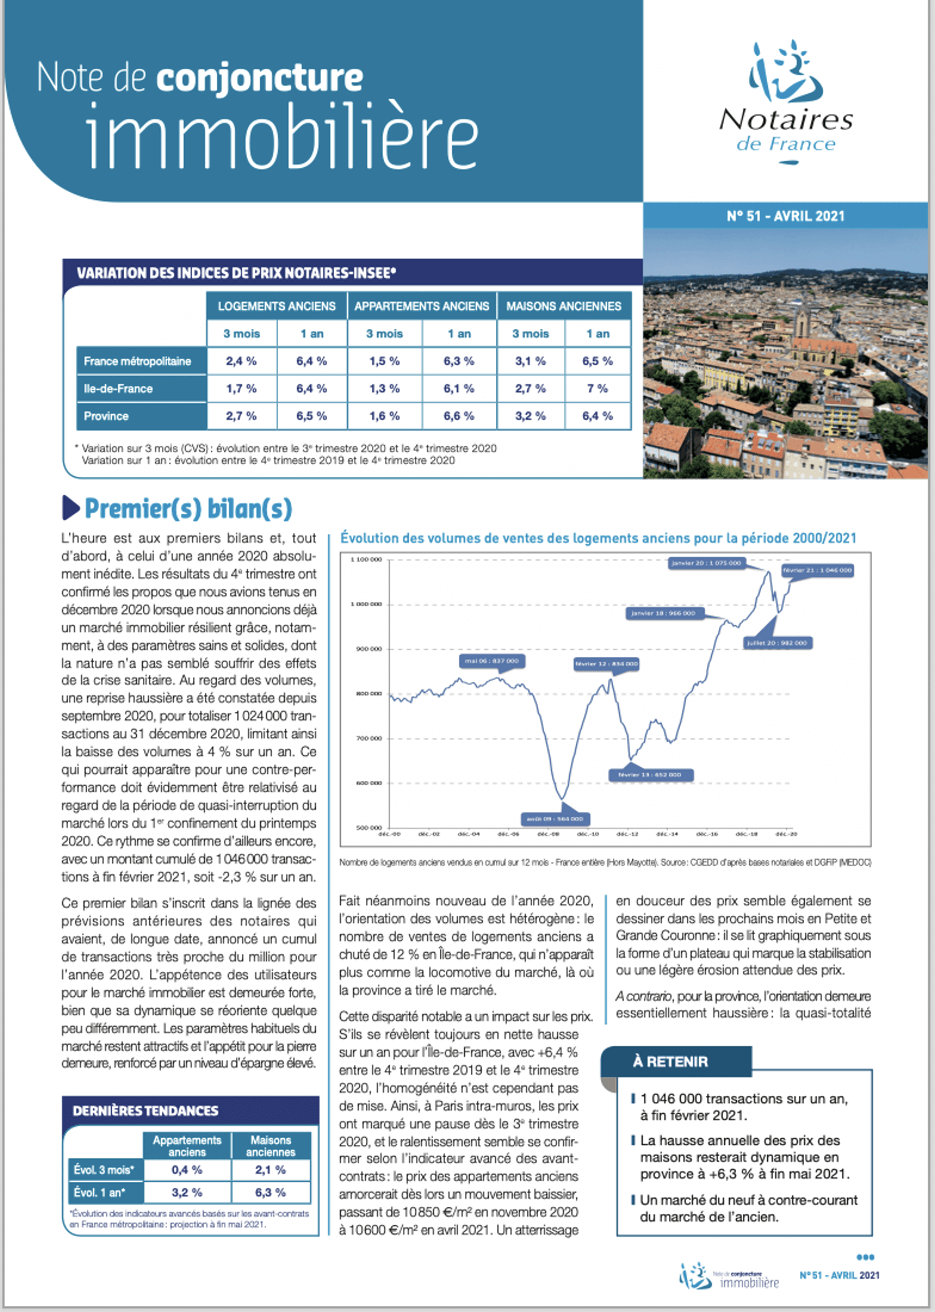 Cover page for the French Notaires' real estate report